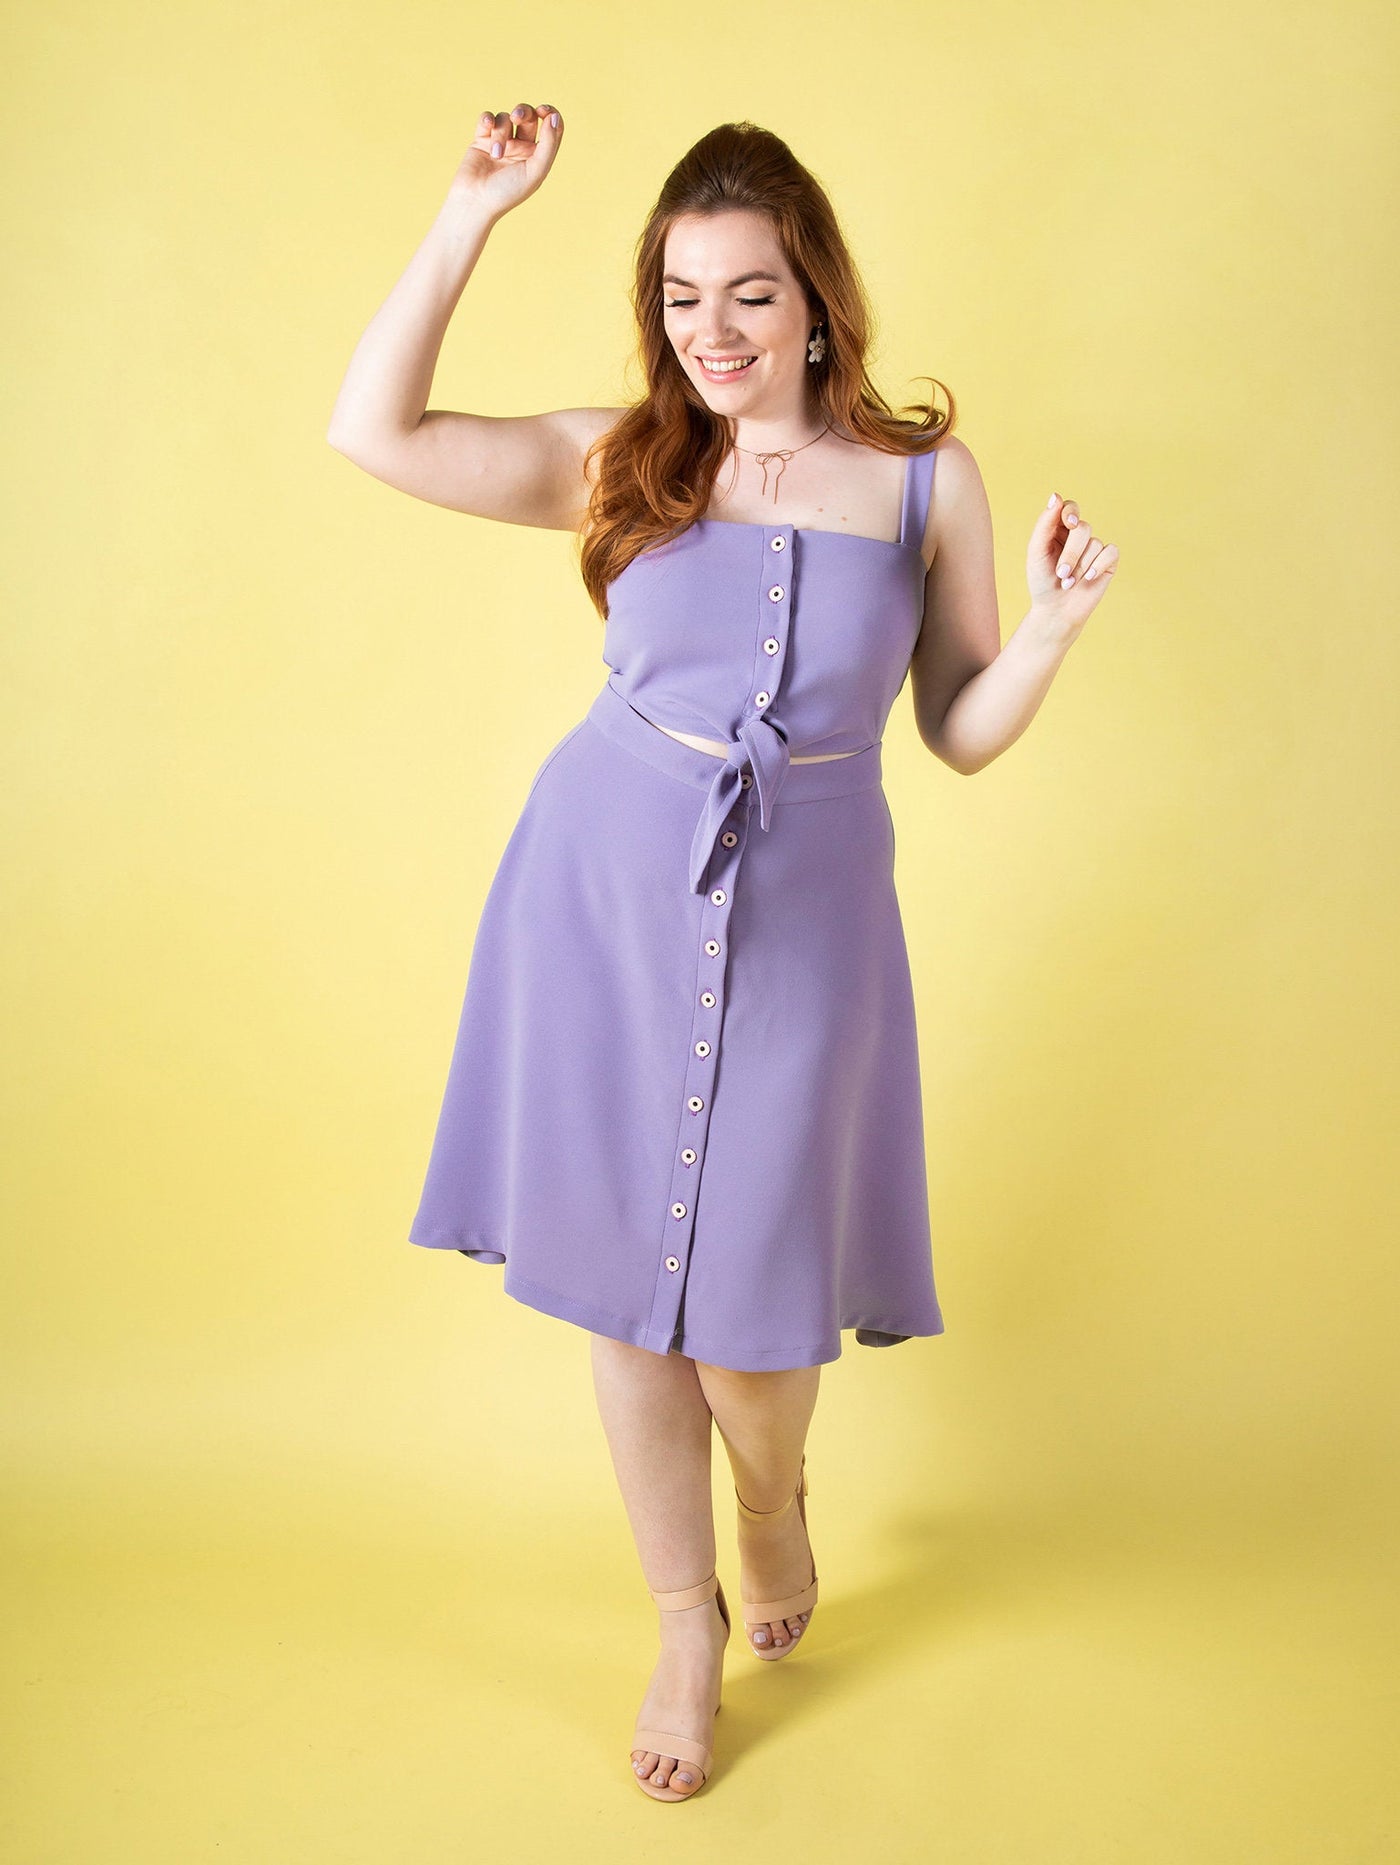 Tilly and the Buttons Seren summer sun dress sewing pattern. Easy casual dress pattern.